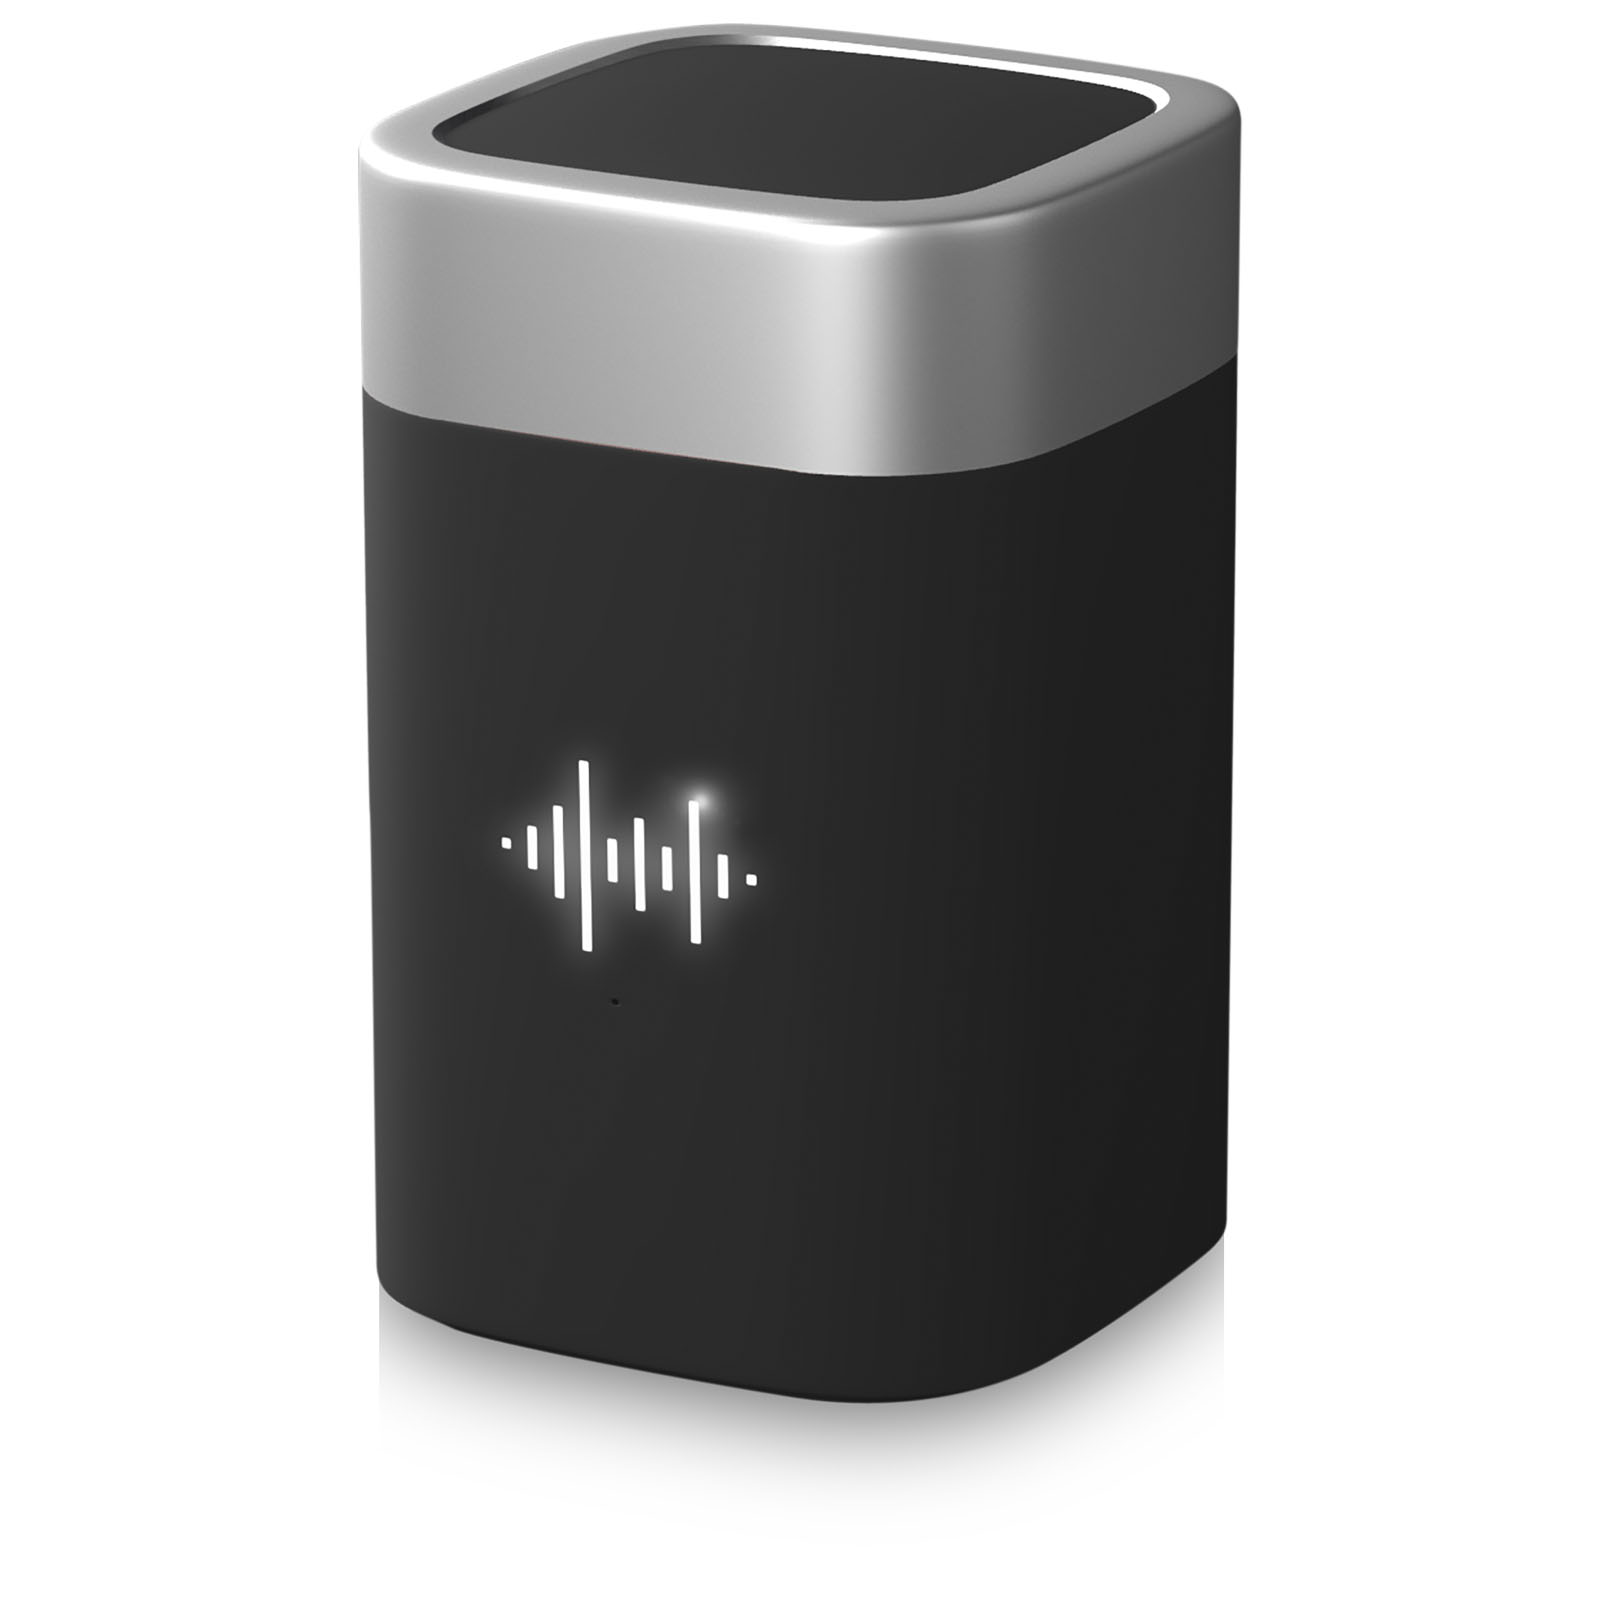 A 5W Bluetooth speaker that works wirelessly, illuminates the logo, and is treated with antibacterial solutions. - Altrincham